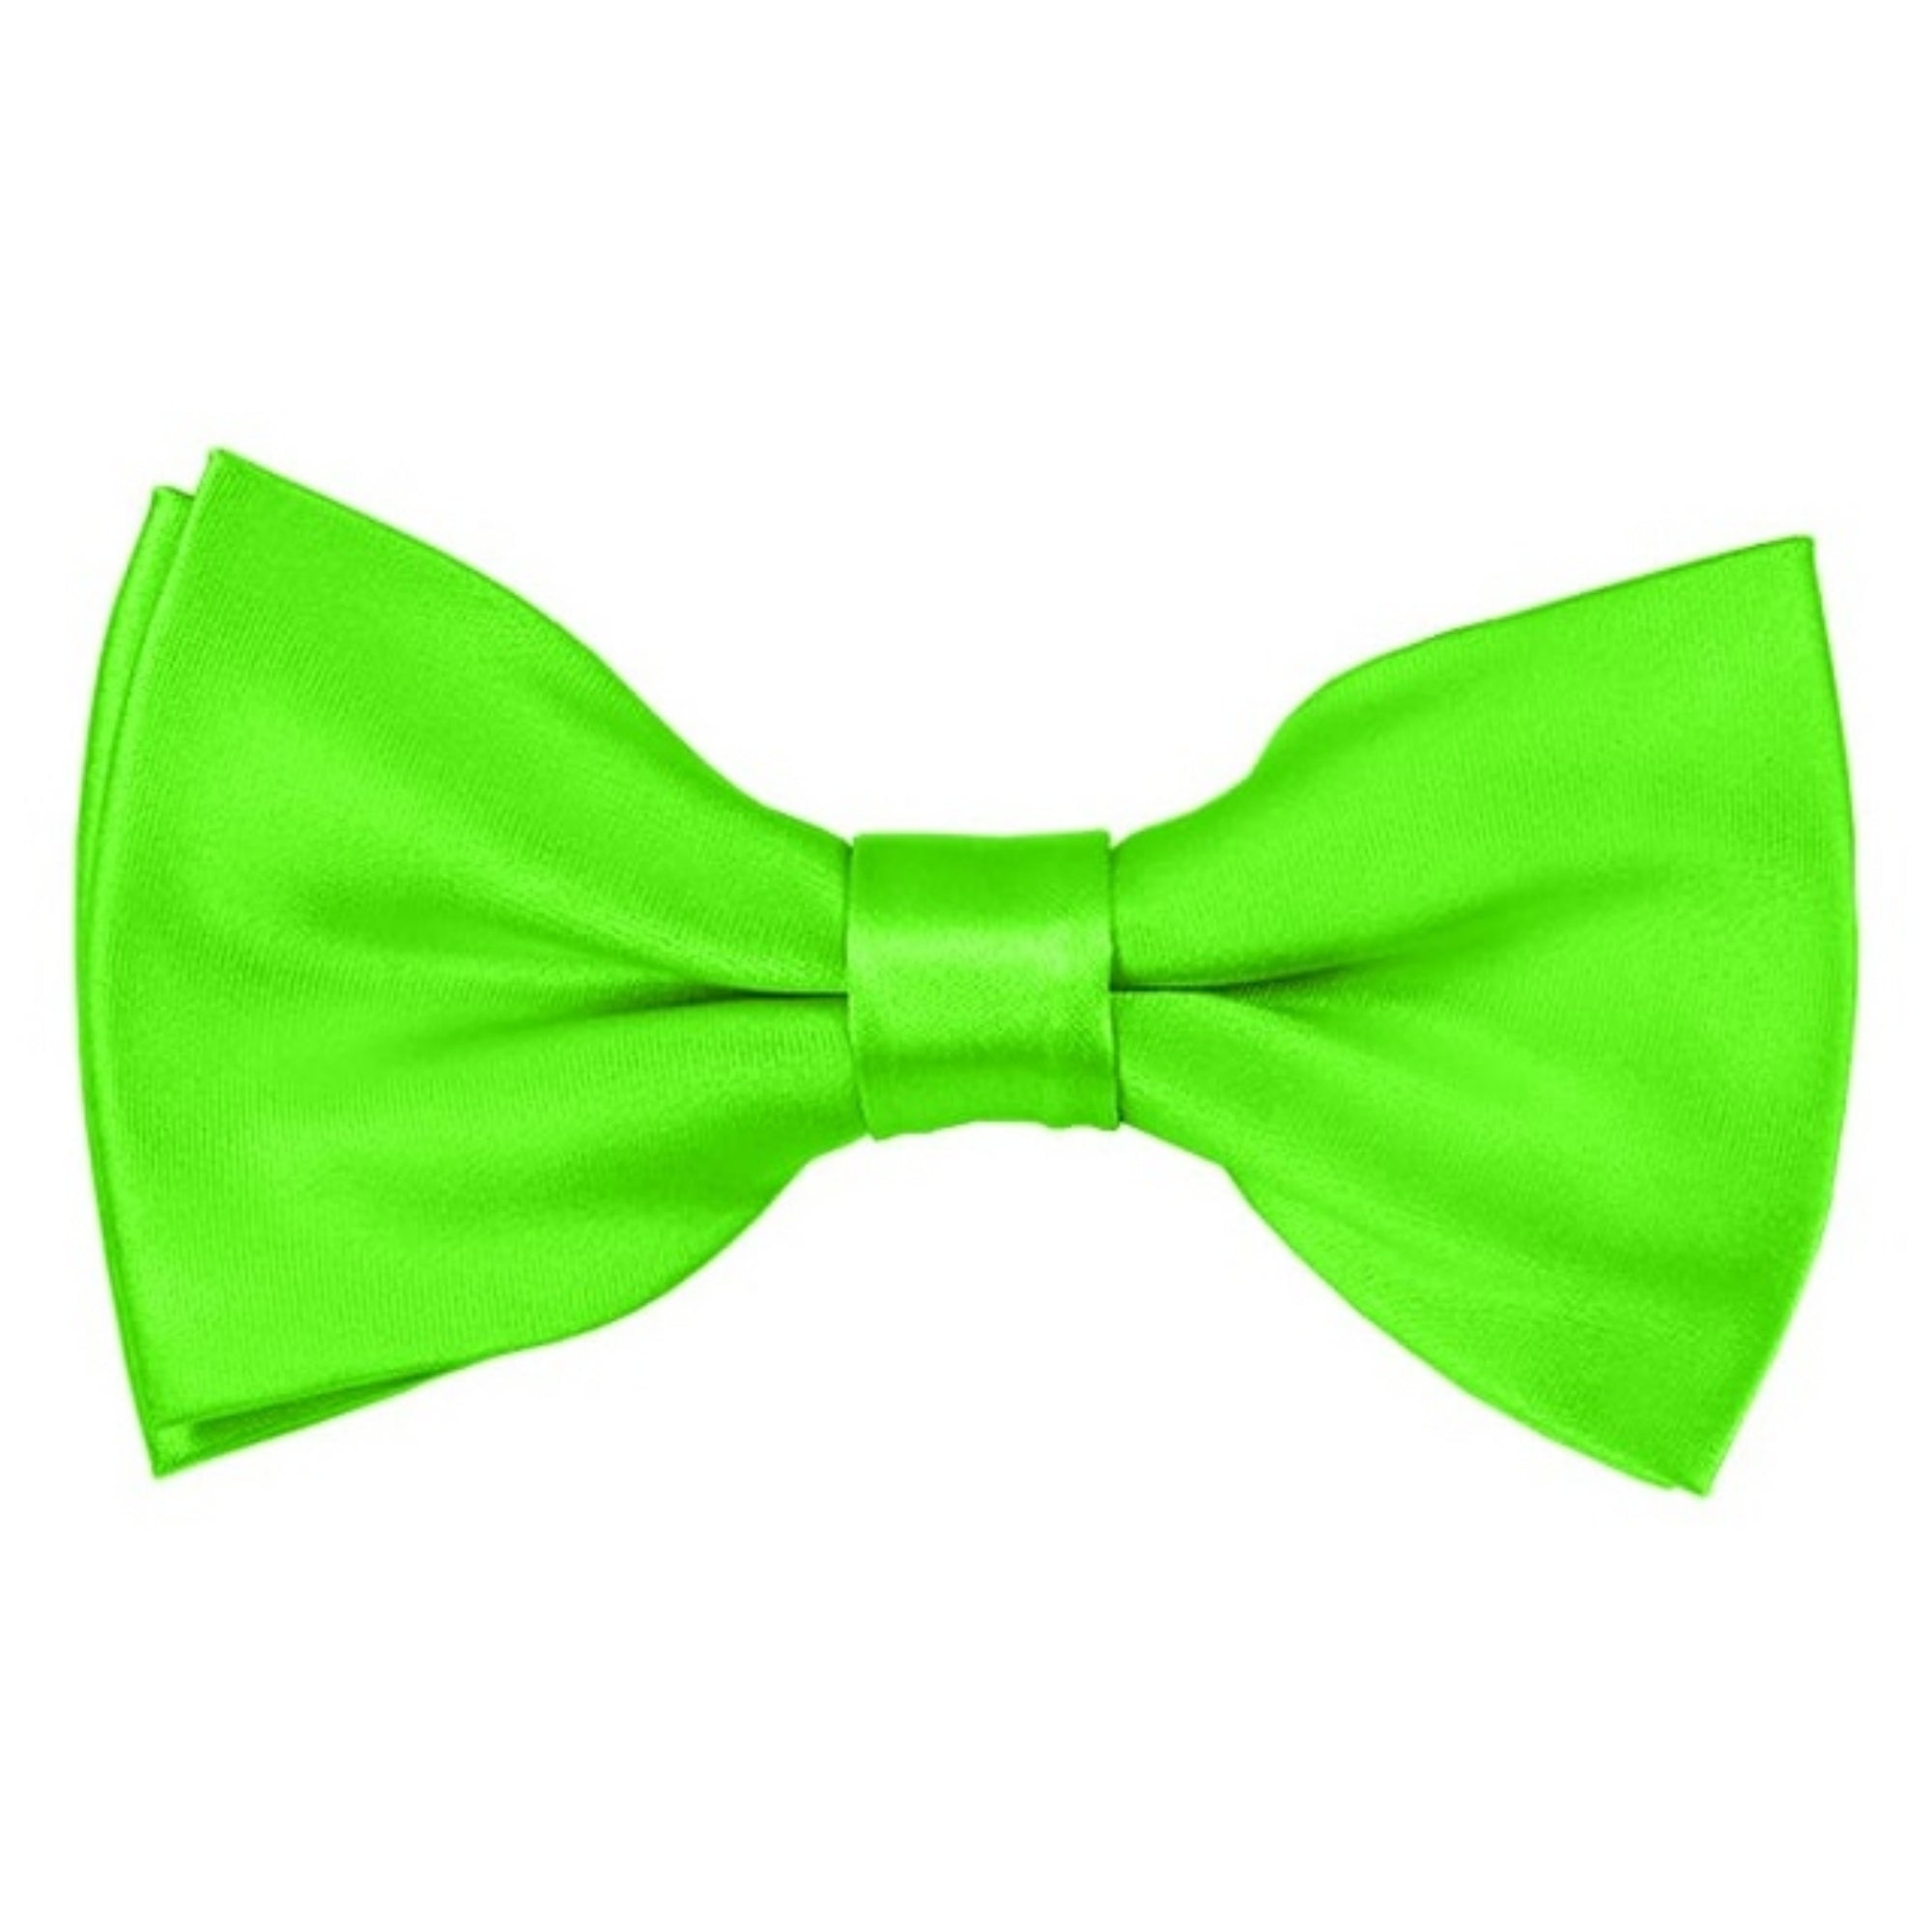 TheDapperTie Men's Solid Color 2.5 W And 4.5 L Inch Pre-Tied adjustable Bow Ties Men's Solid Color Bow Tie TheDapperTie Lime Green  